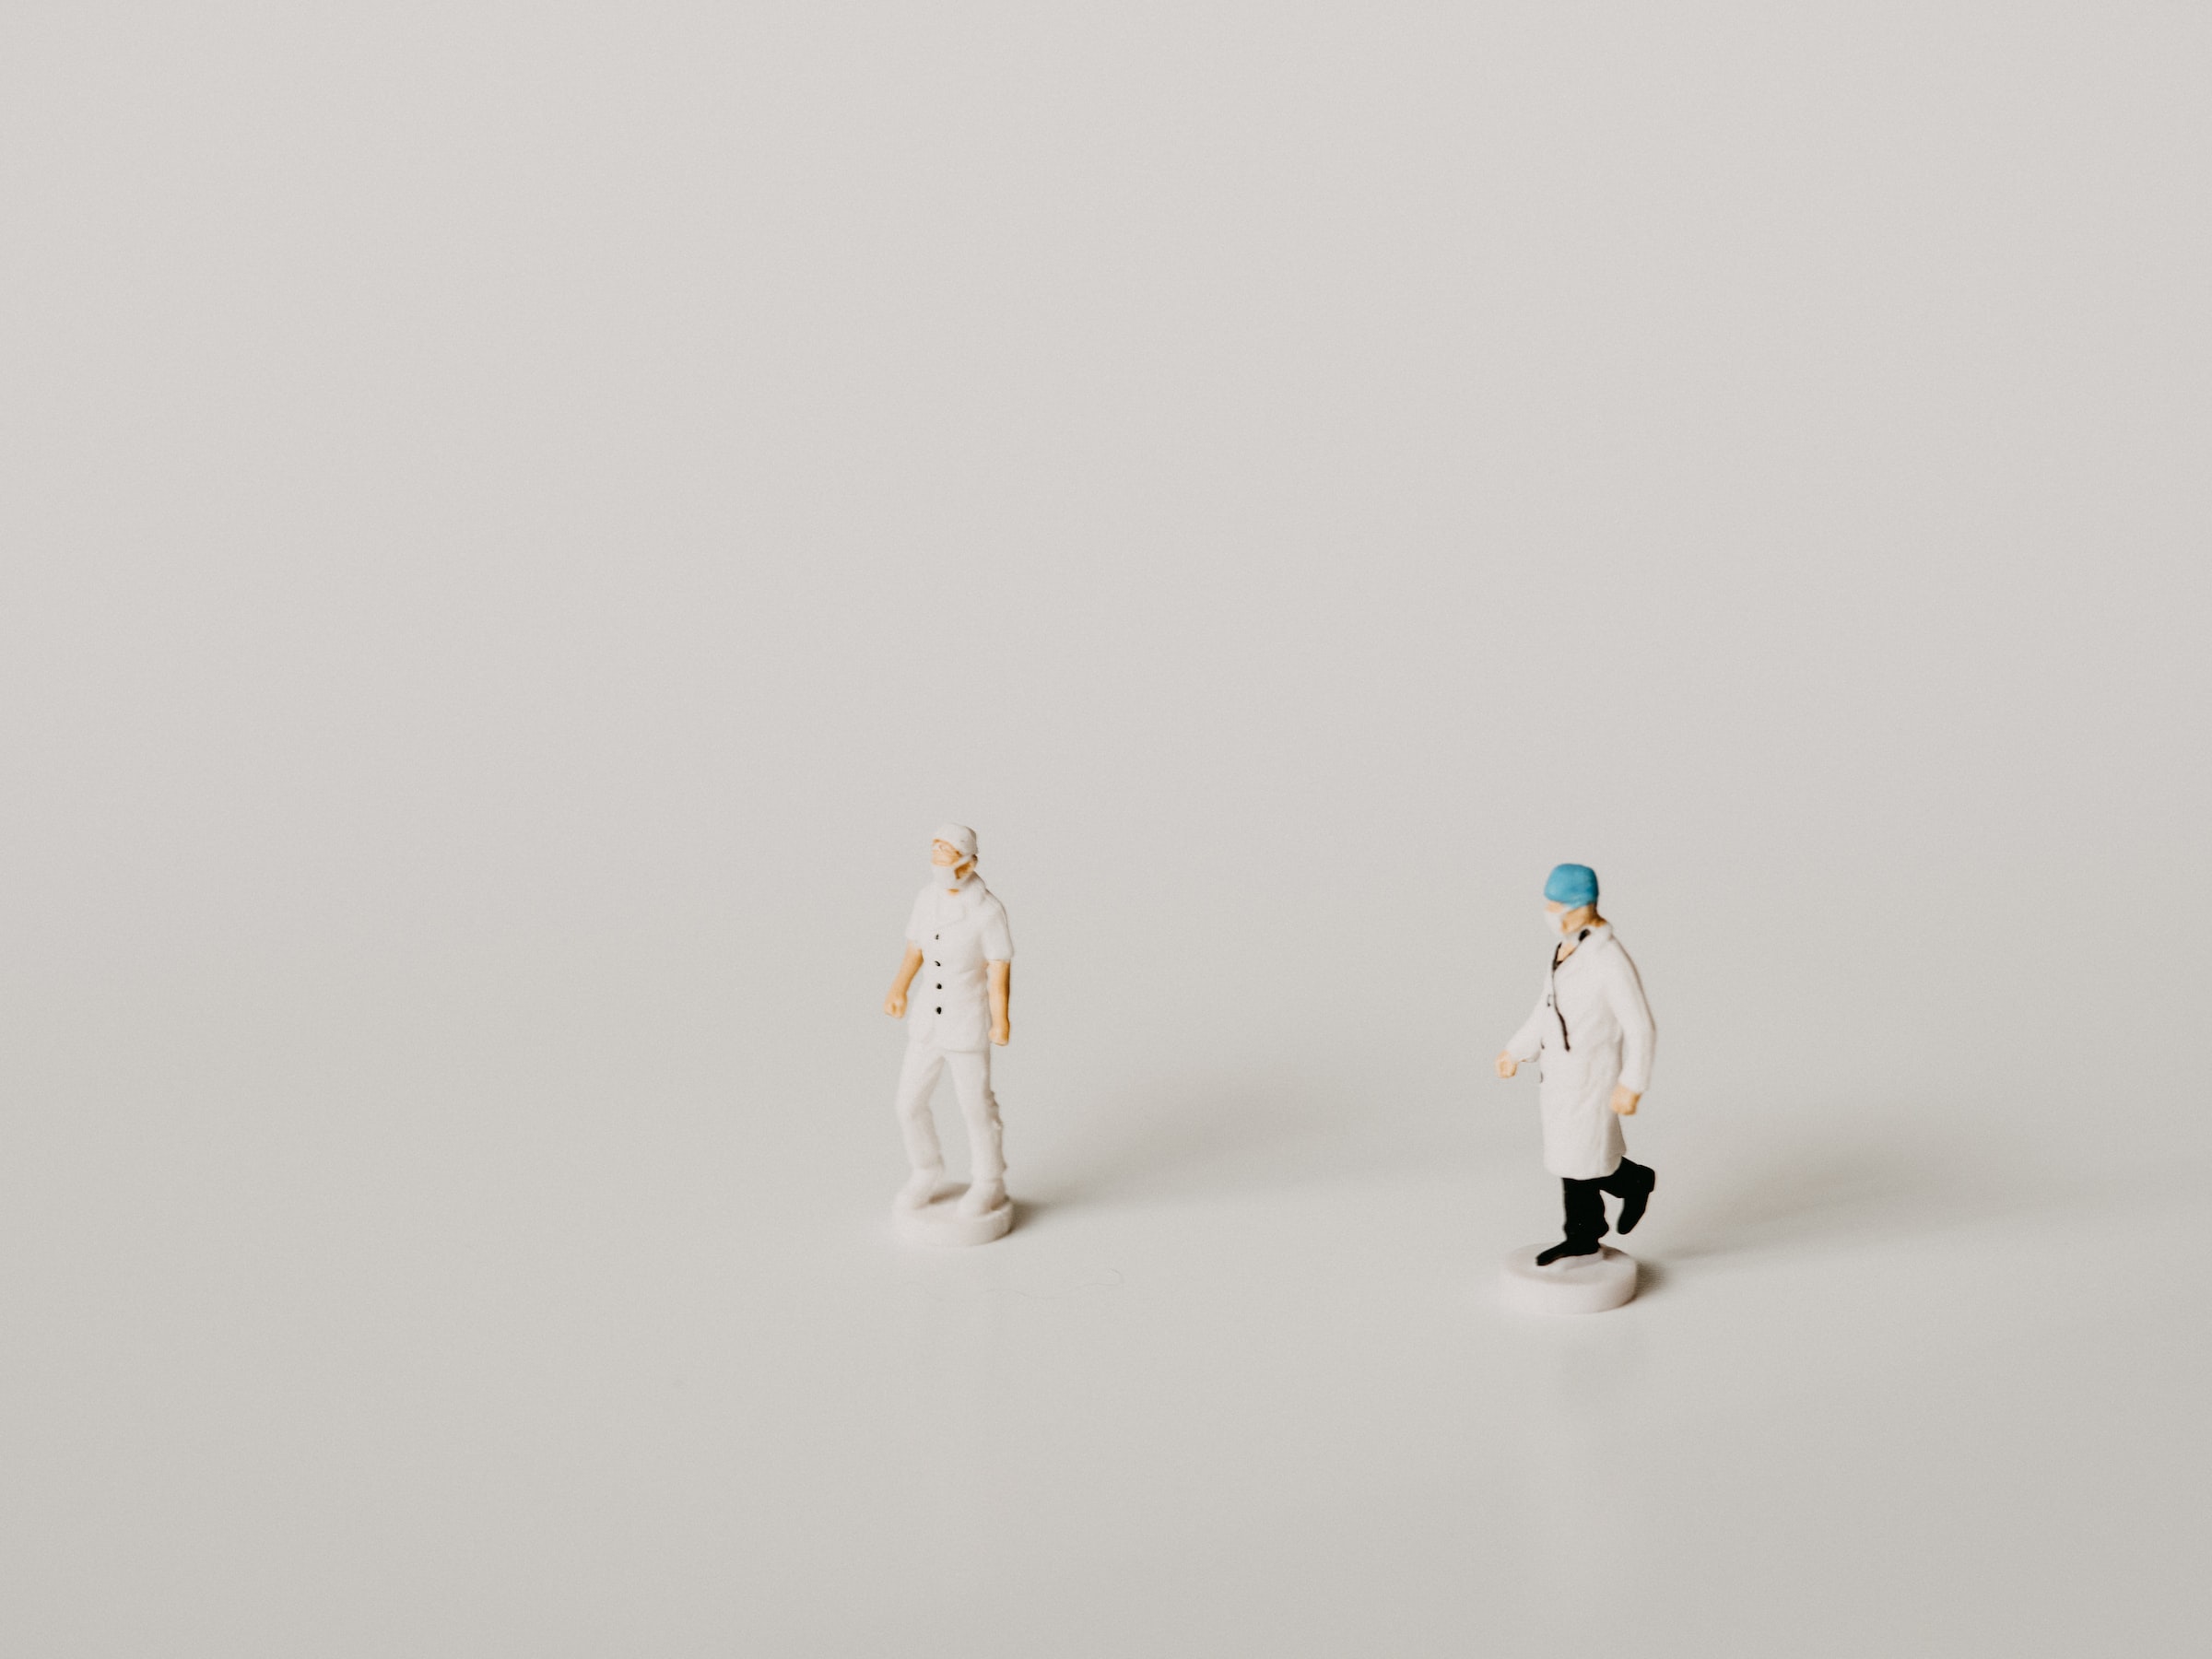 Photo of two plastic figurine doctors (white, male), posed as if to look like they are walking in the same direction, against a stark white background.